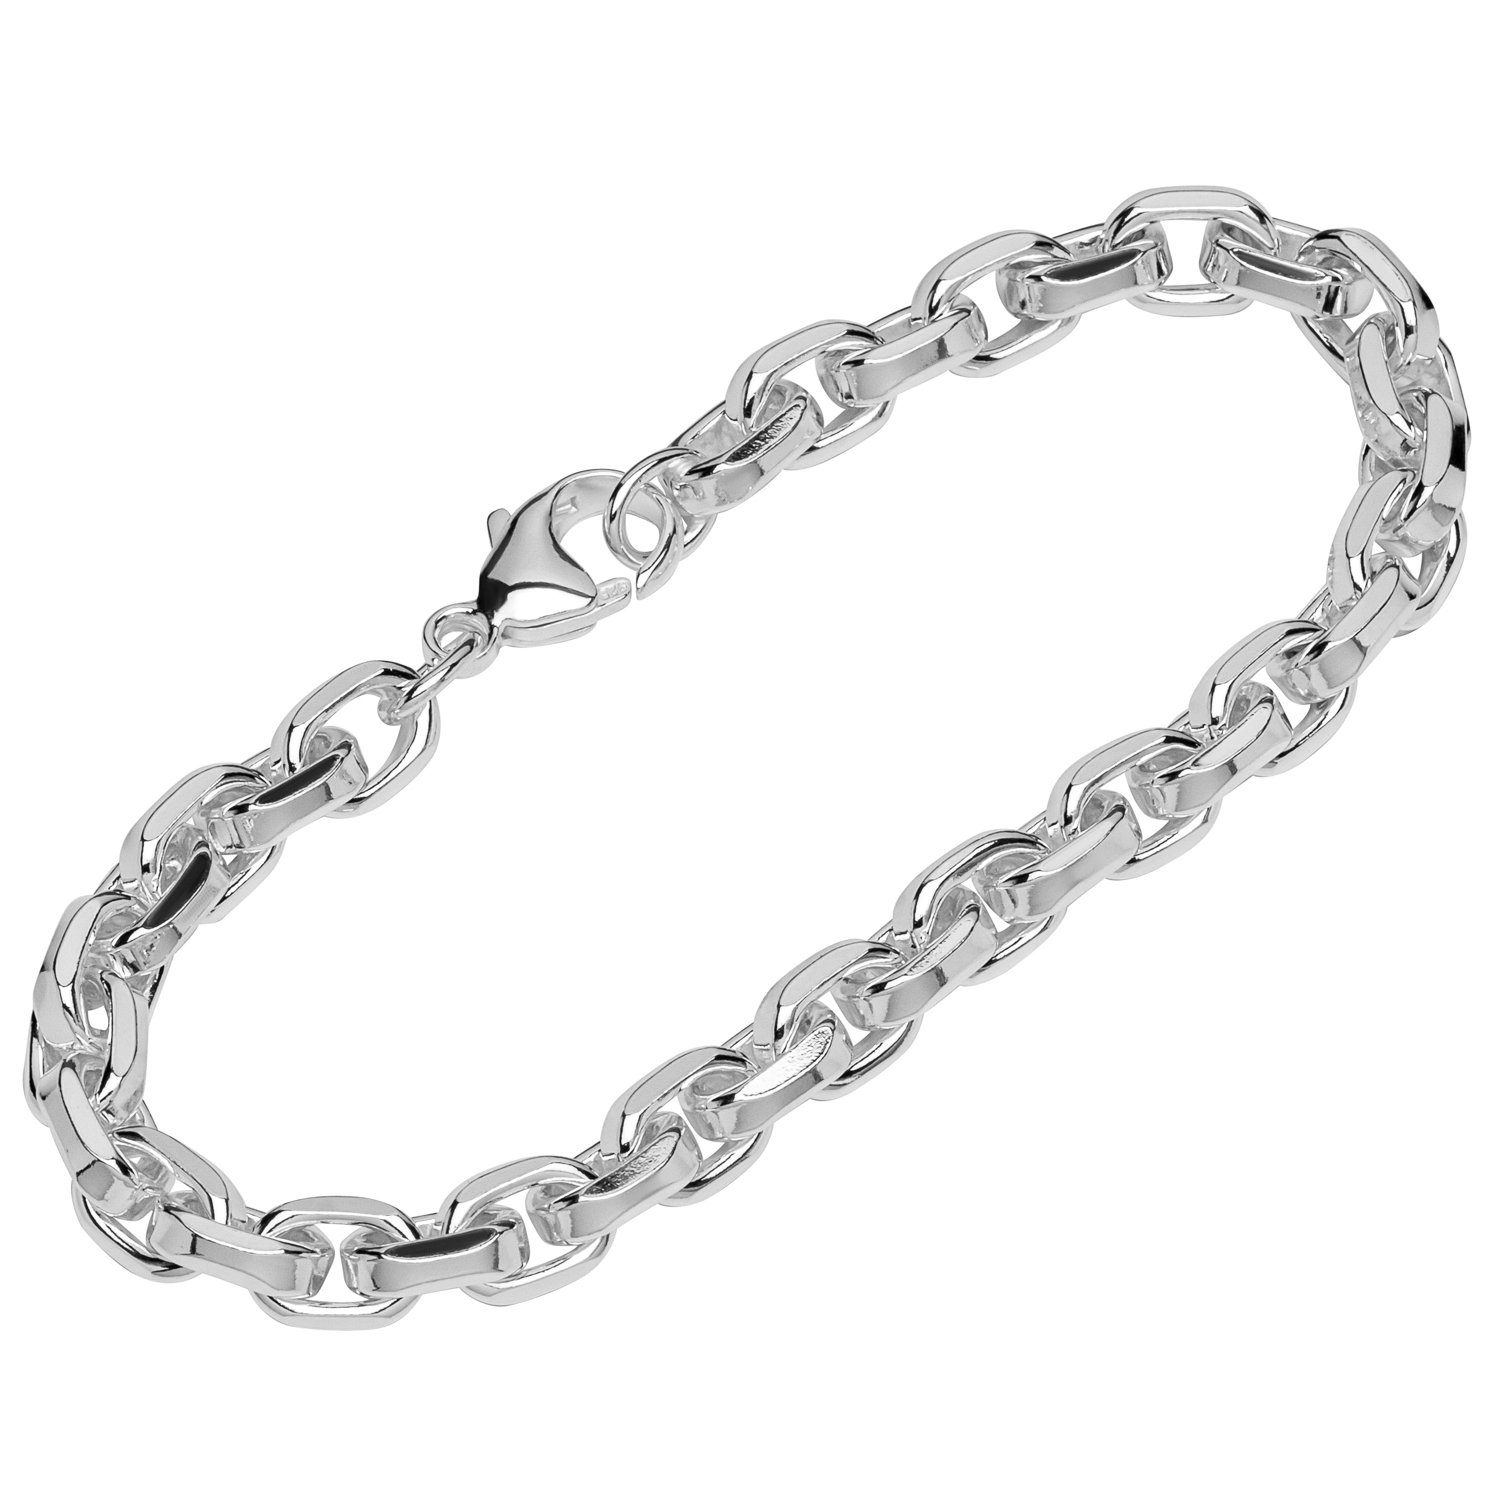 Silber 925 Made Sterling Stück), Silberarmband fach Ankerkette in Armband (1 22cm Germany 6 NKlaus